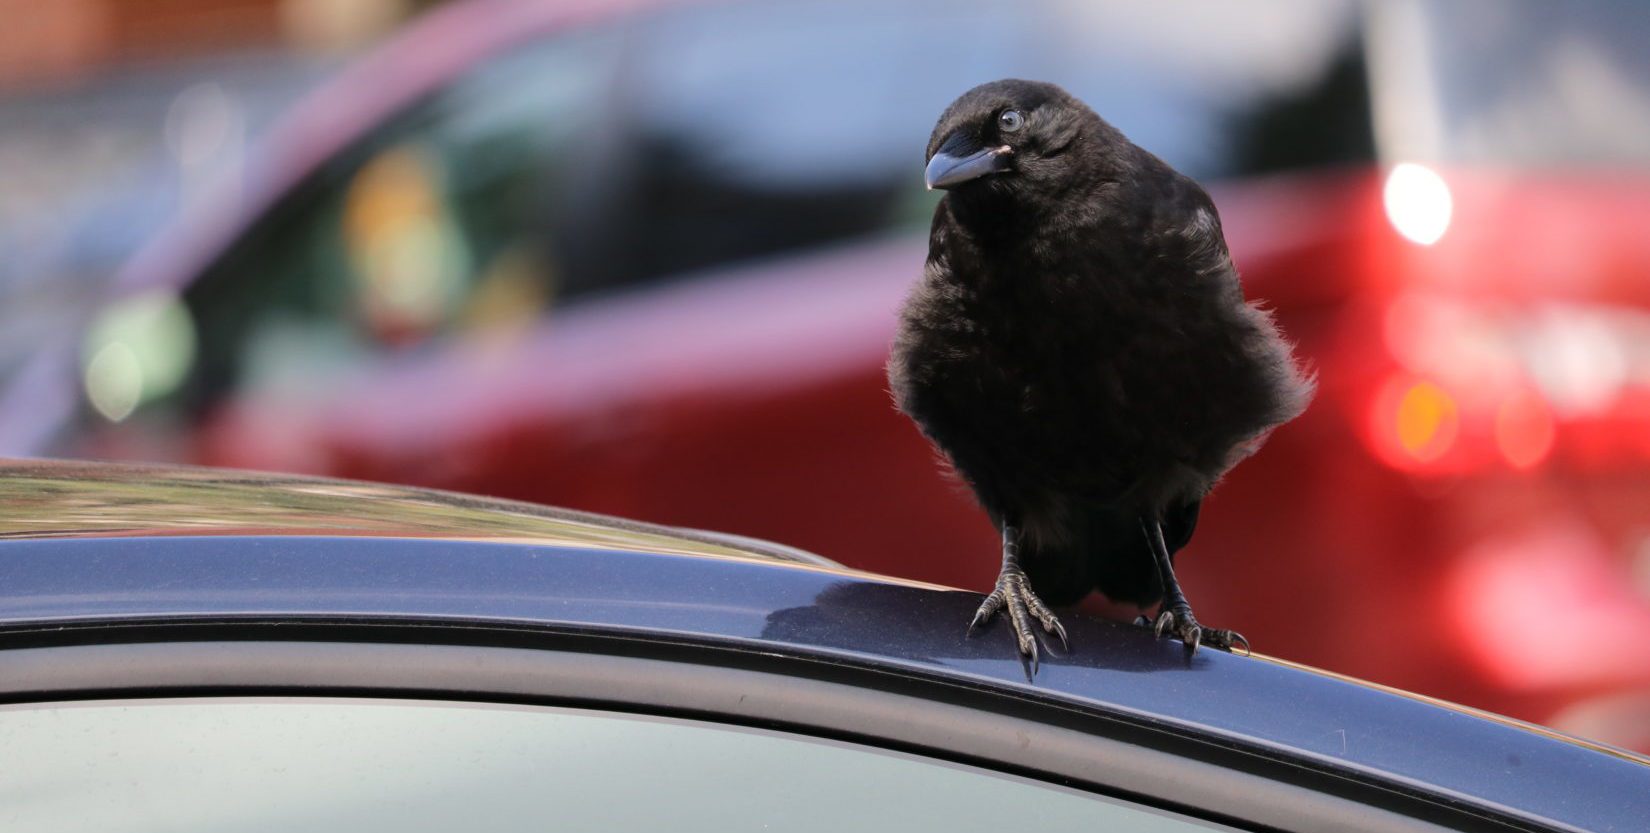 Crow standing on car